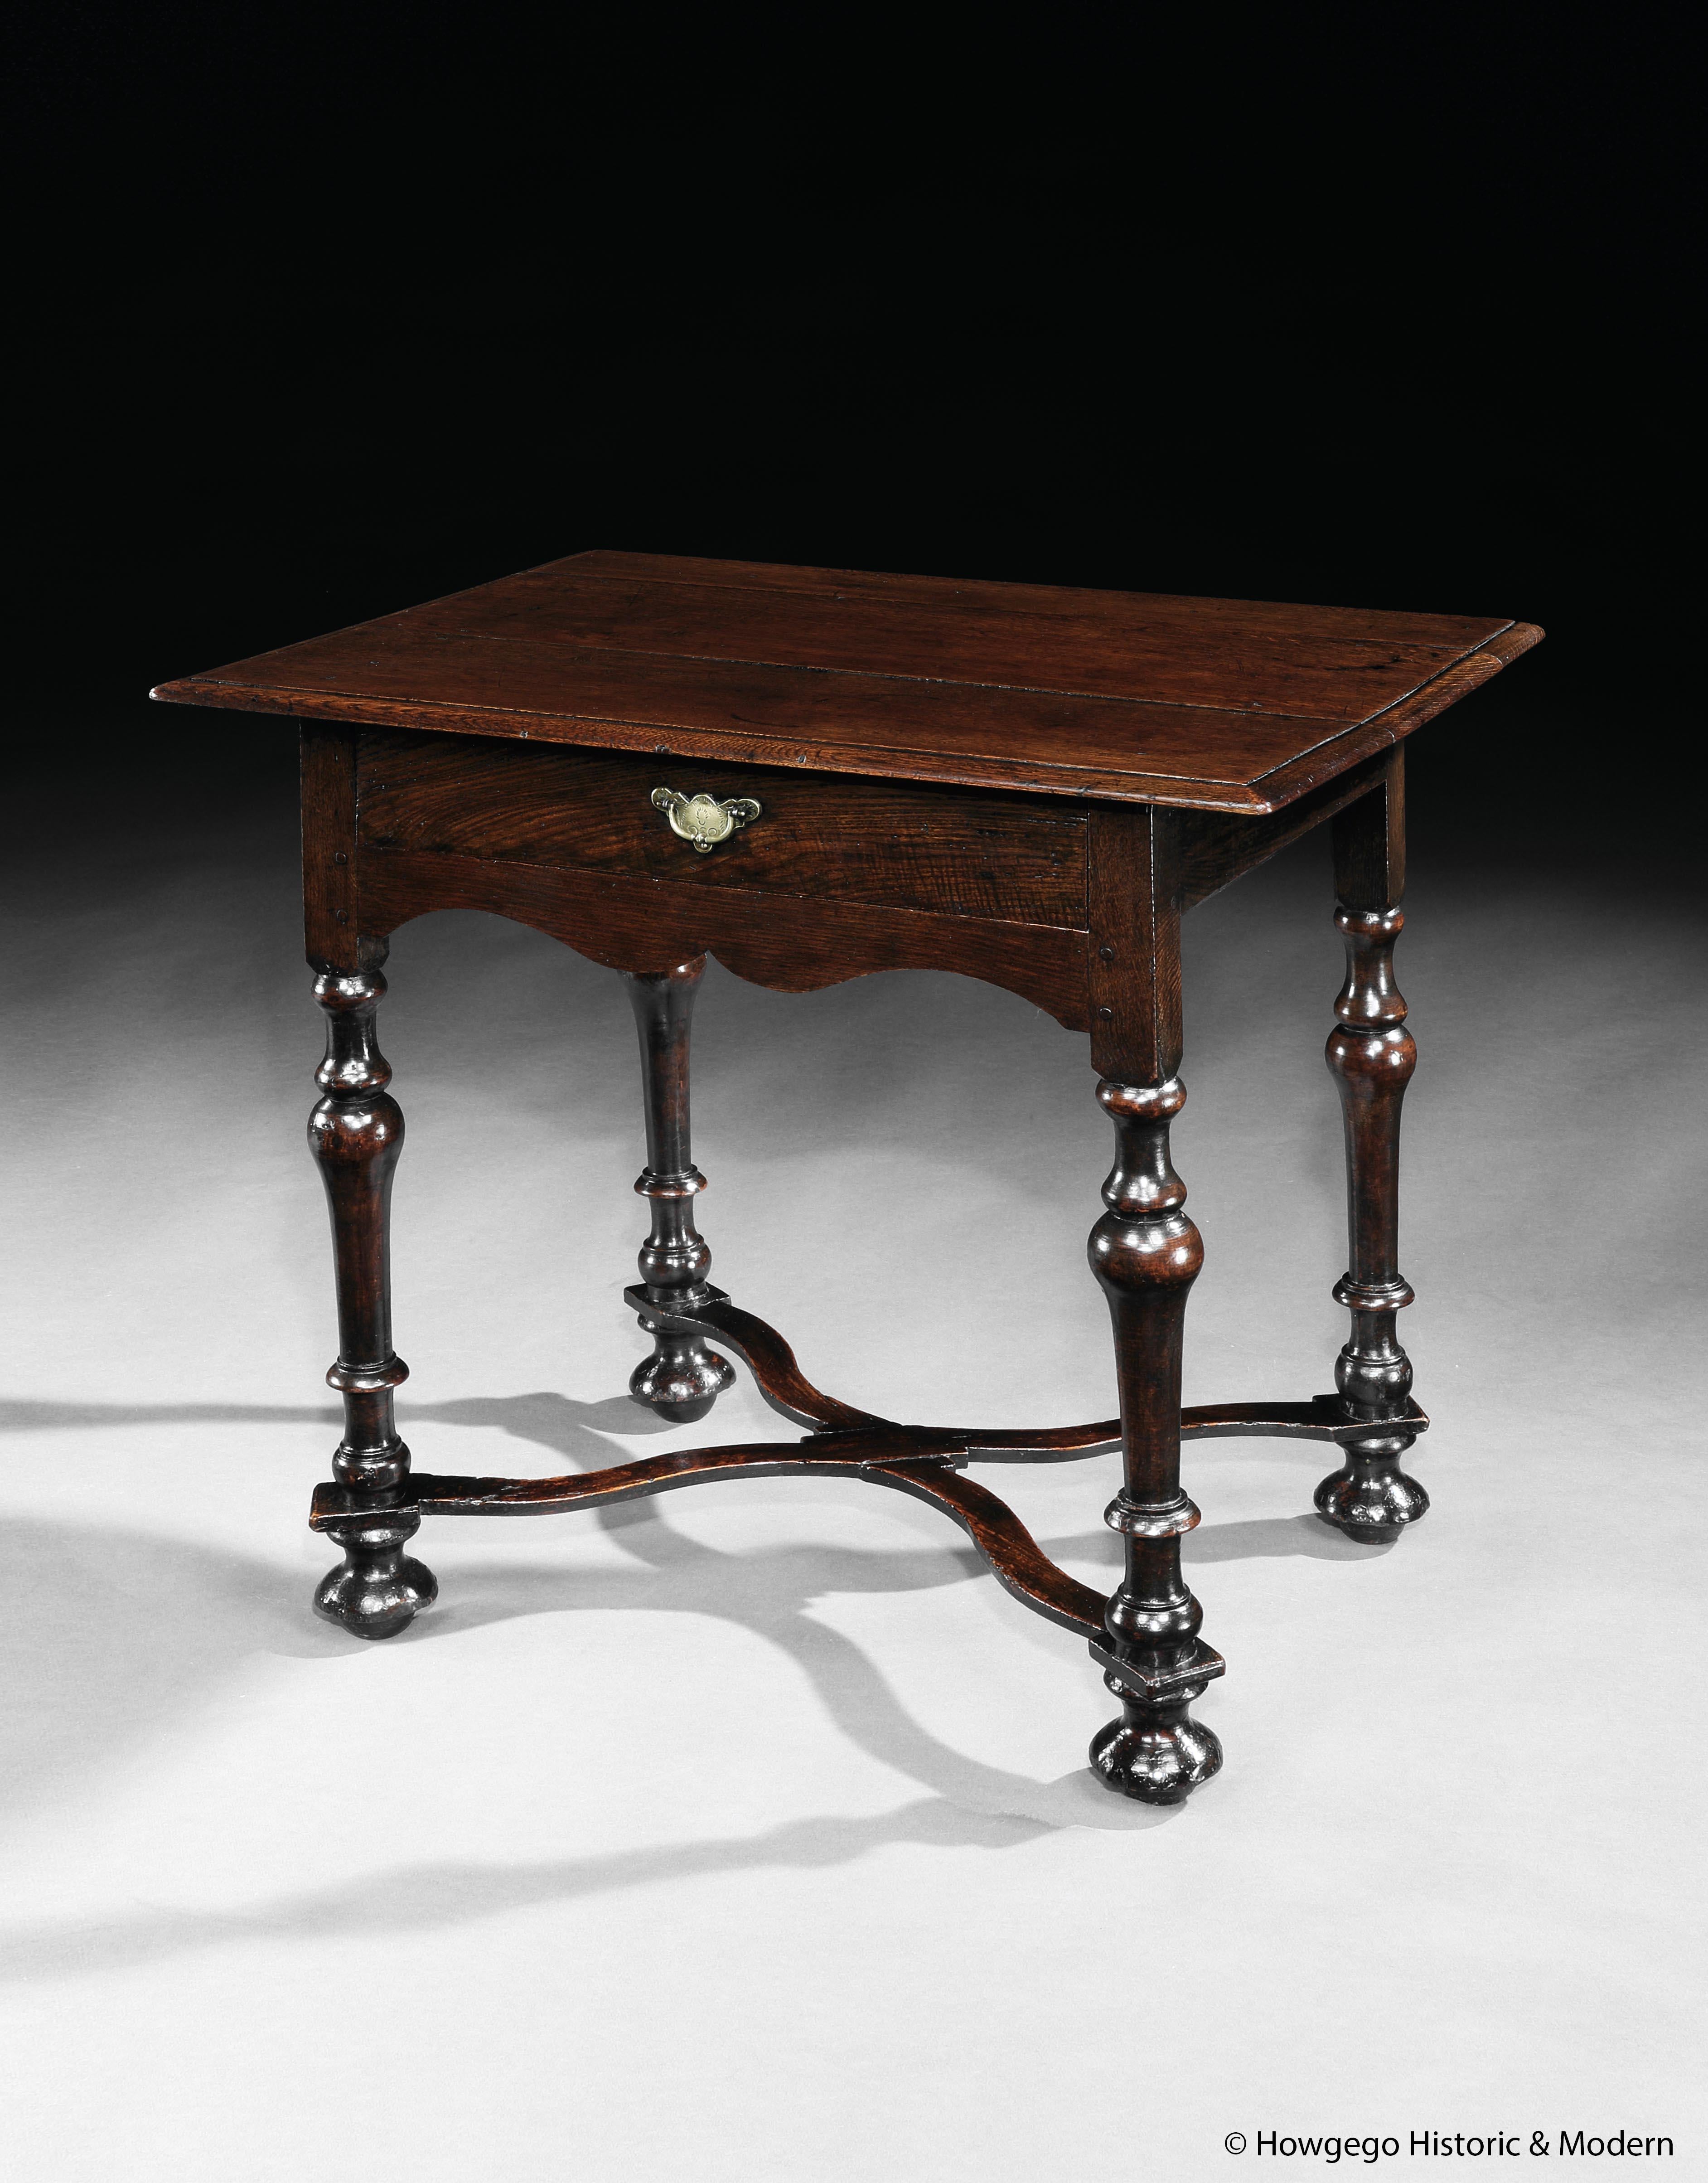 Elegant, 17th /early 18th-century, x-stretcher, oak Anglo-Dutch sidetable

• Elegant sidetable injecting period charm into contemporary, modern or historic interiors
• Fluid form with softly turned tapering legs and curved ‘X’ stretcher
• Rich,